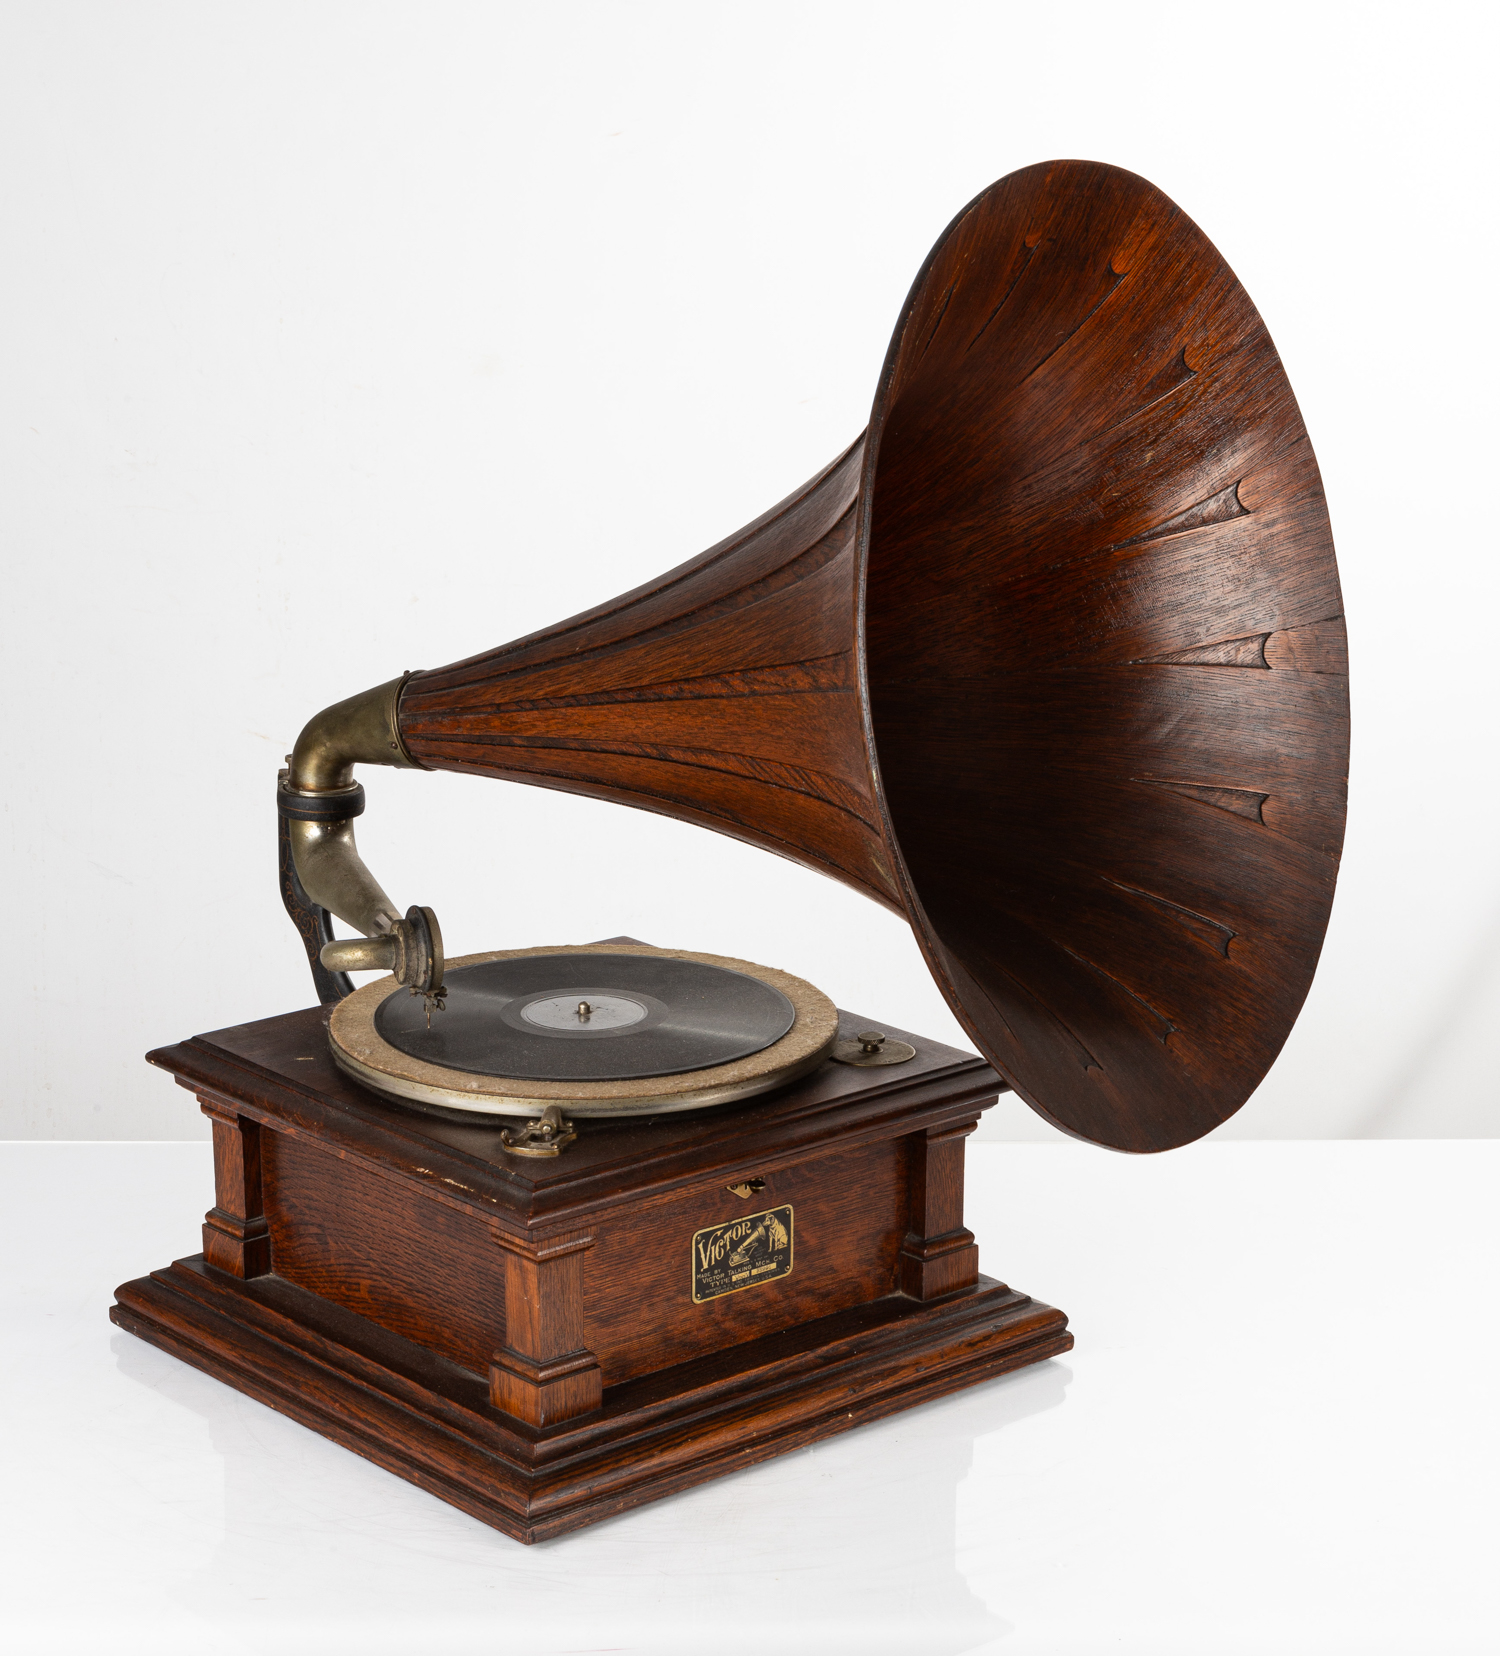 VICTOR MODEL D PHONOGRAPH WITH WOODEN